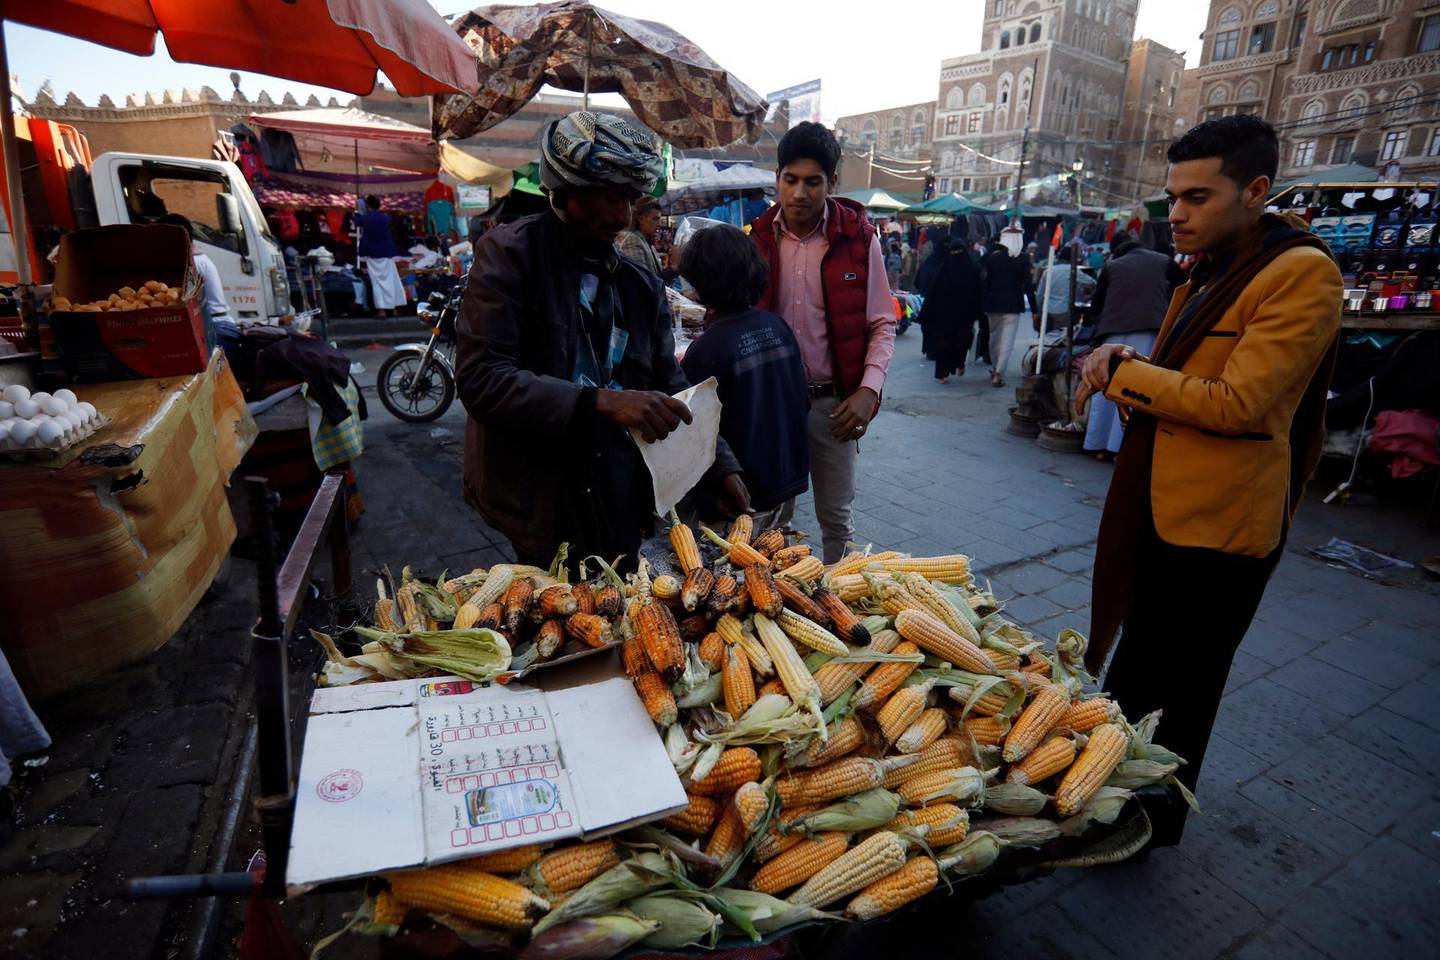 epa08136659 A Yemeni vendor (L) displays grilled maize for sale at a market in the old quarter of Sanaa, Yemen, 17 January 2020. According to reports, UN special envoy to Yemen Martin Griffiths will head to the Houthi-held capital Sanaa next week as part of his ongoing diplomatic efforts to revive the stumbling political process between Yemen's warring parties, hoping the belligerents could resume peace talks to end the prolonged war, in 2020.  EPA/YAHYA ARHAB